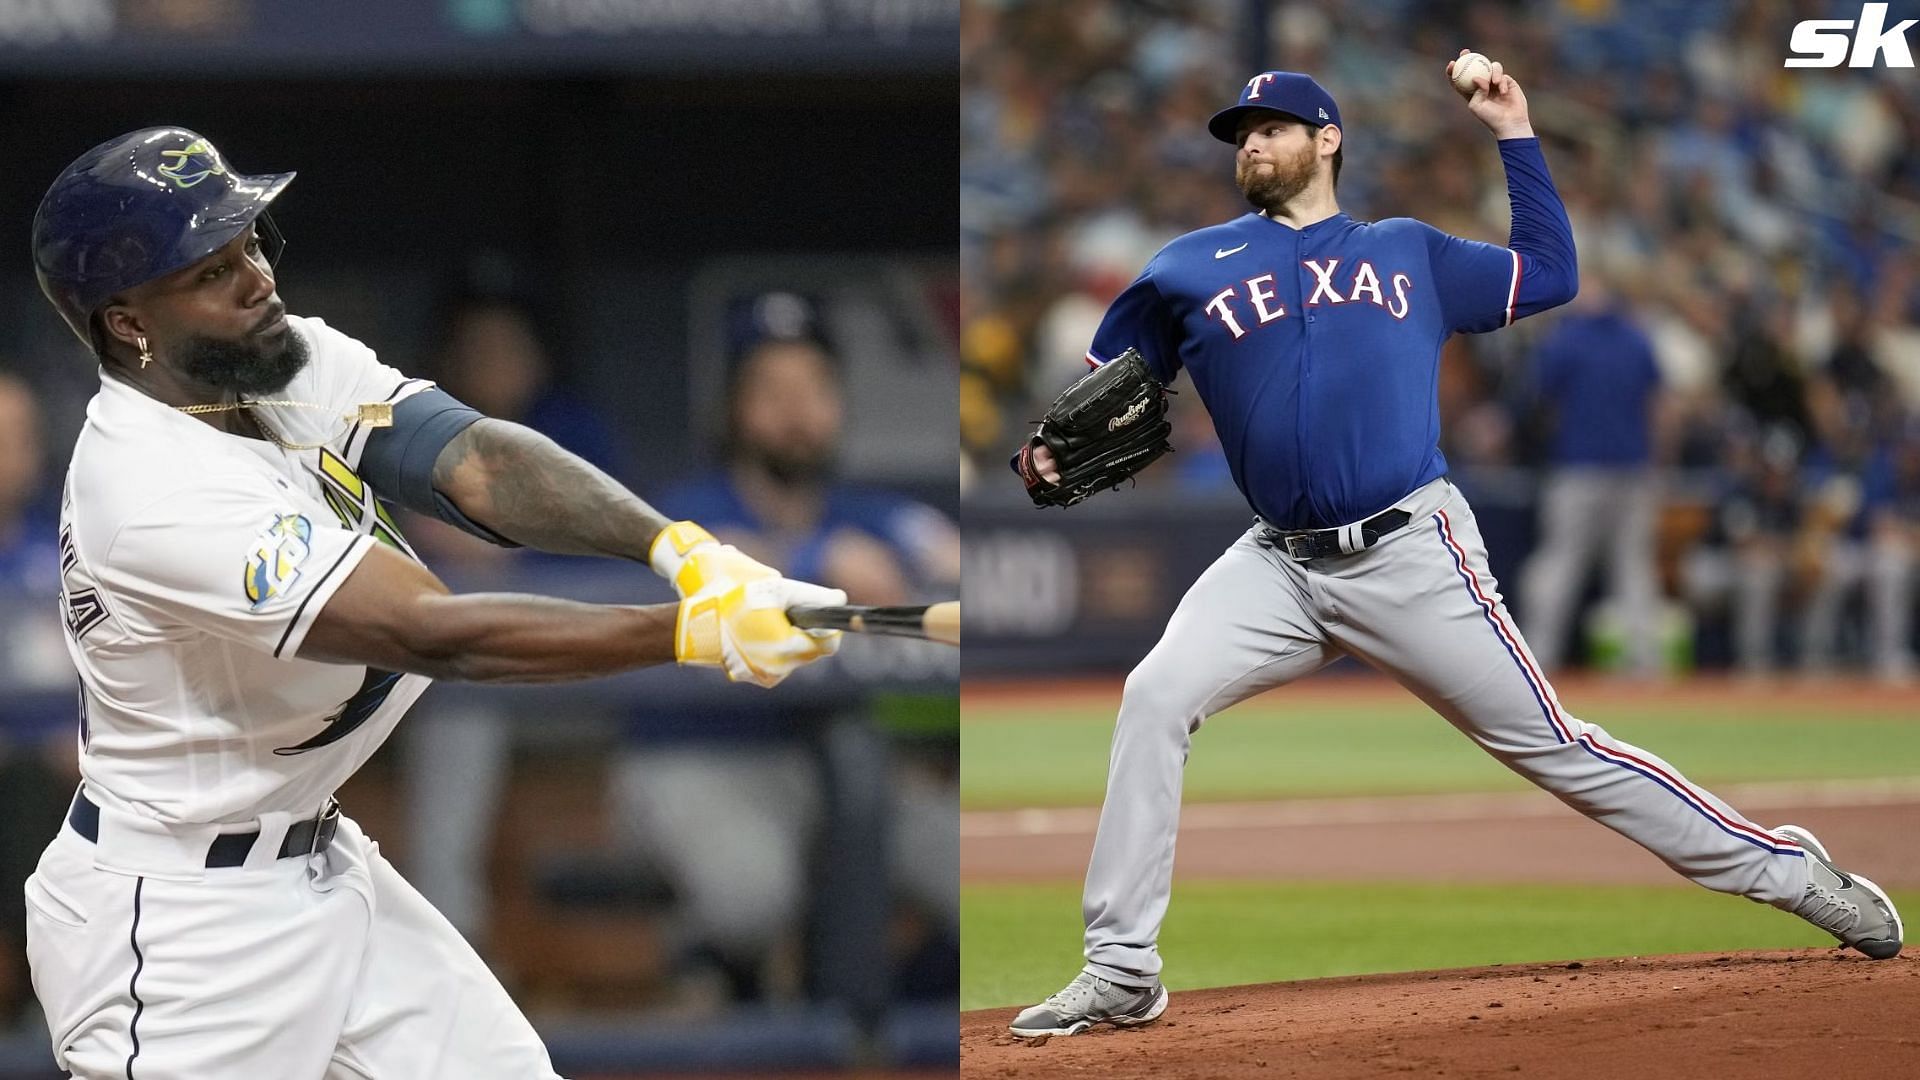 No Rangers-Rays showdown between Lowes is no fun